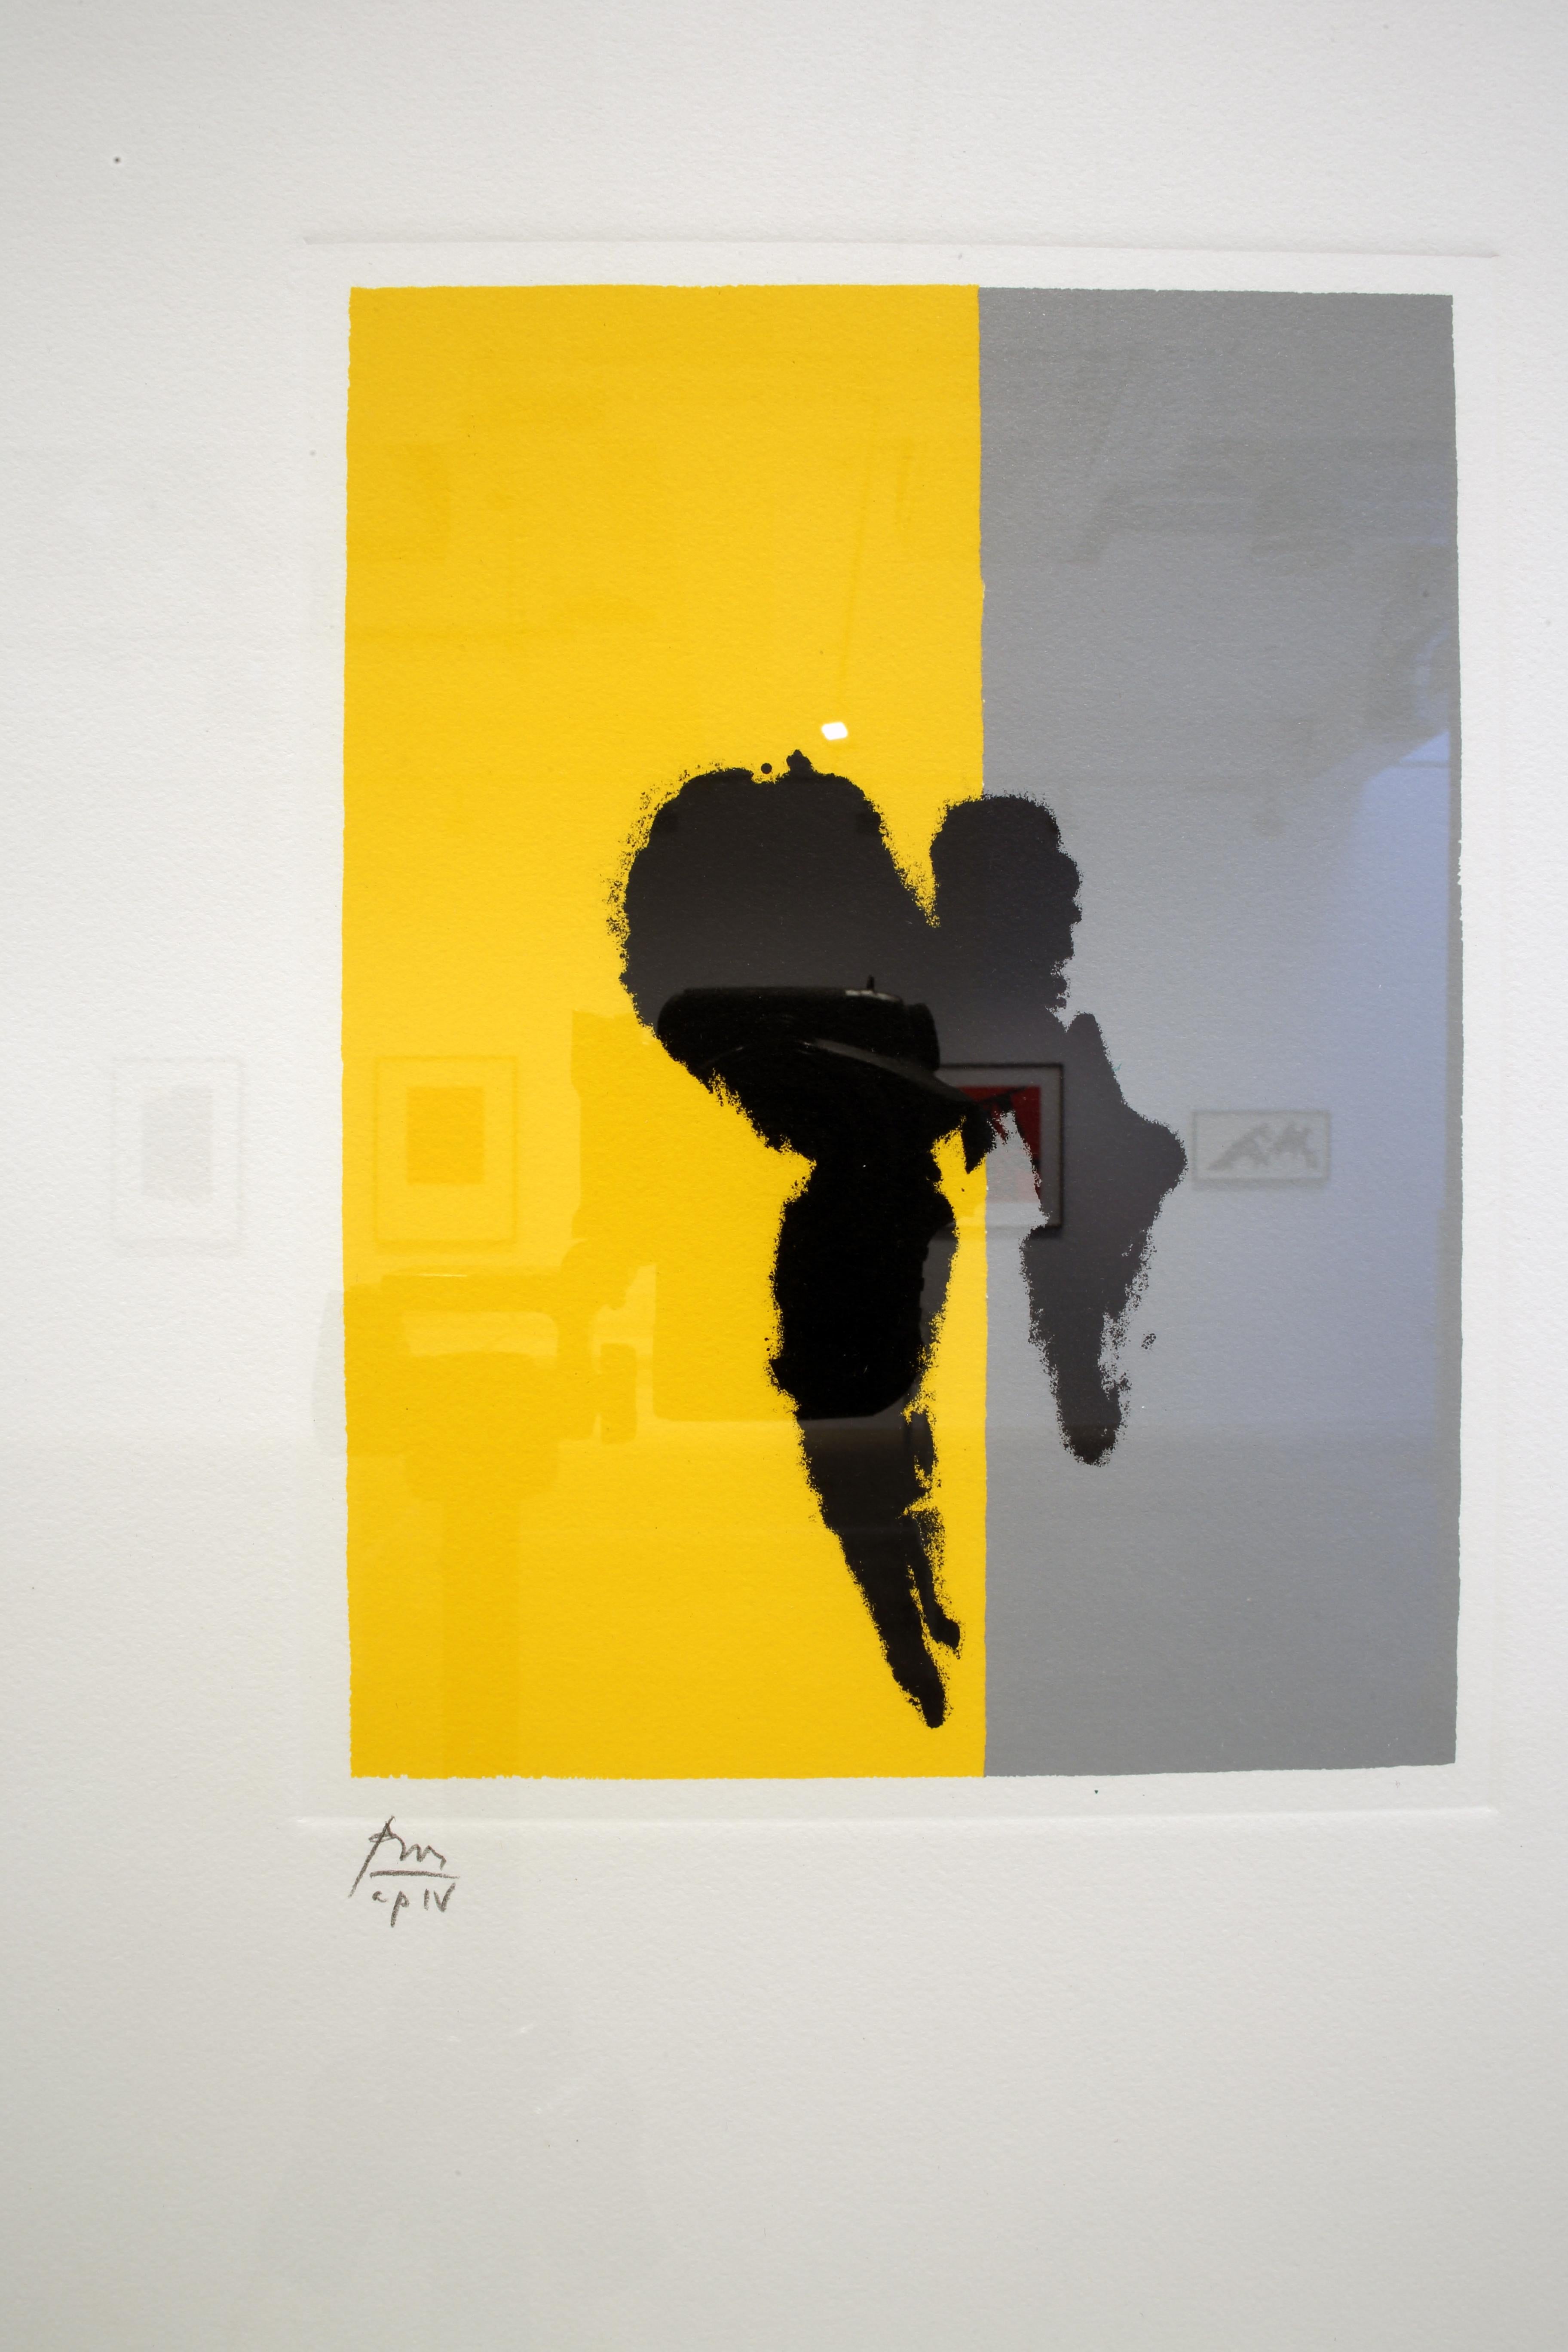 Robert Motherwell
Paris Suite II (Summer)
1980
Lithograph on J.B. Green handmade paper, Edition of 60
49.2 x 41 cms (19 1/2 x 16 ins)
RM17034

CR 265

Signature:Signed 